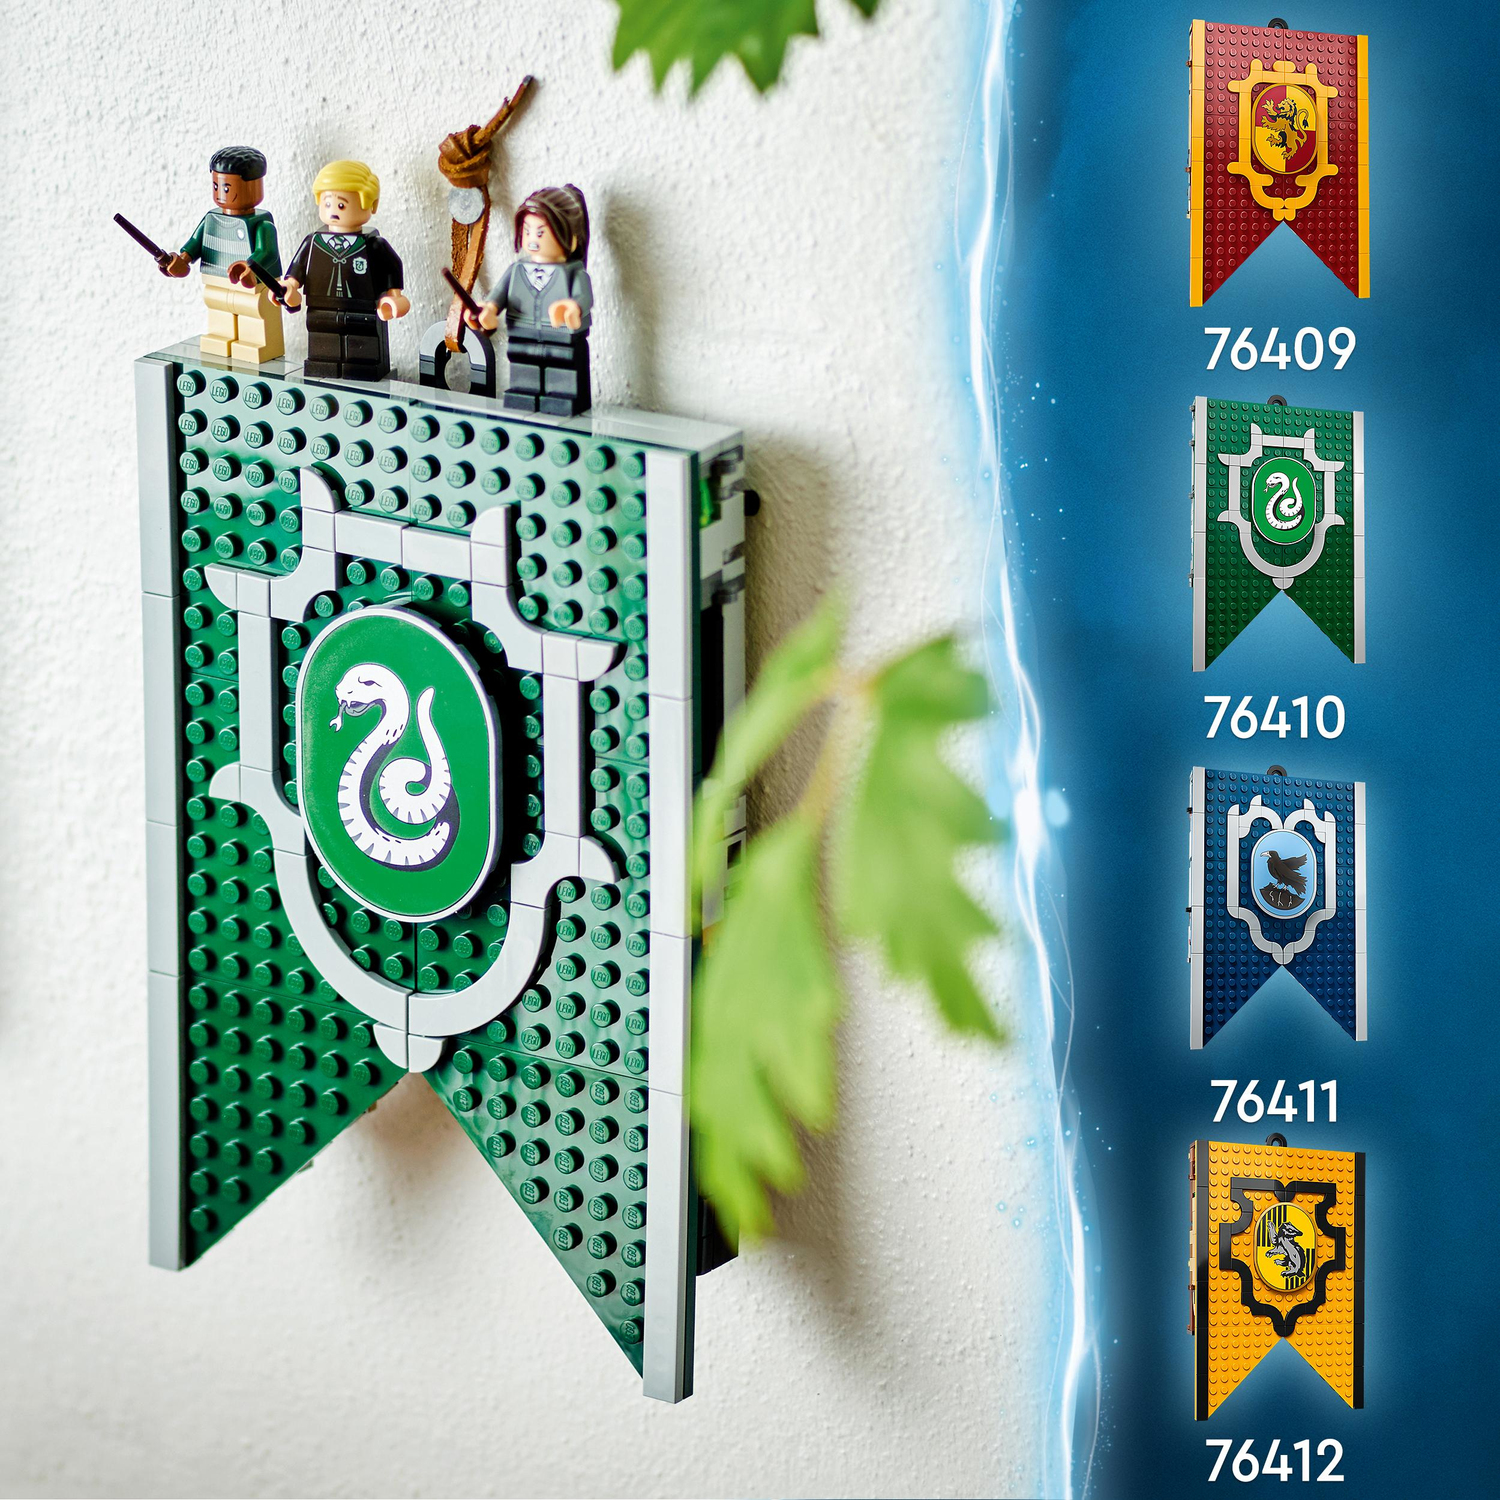 Lego Harry Potter A Spellbinding Guide To Hogwarts Houses - By